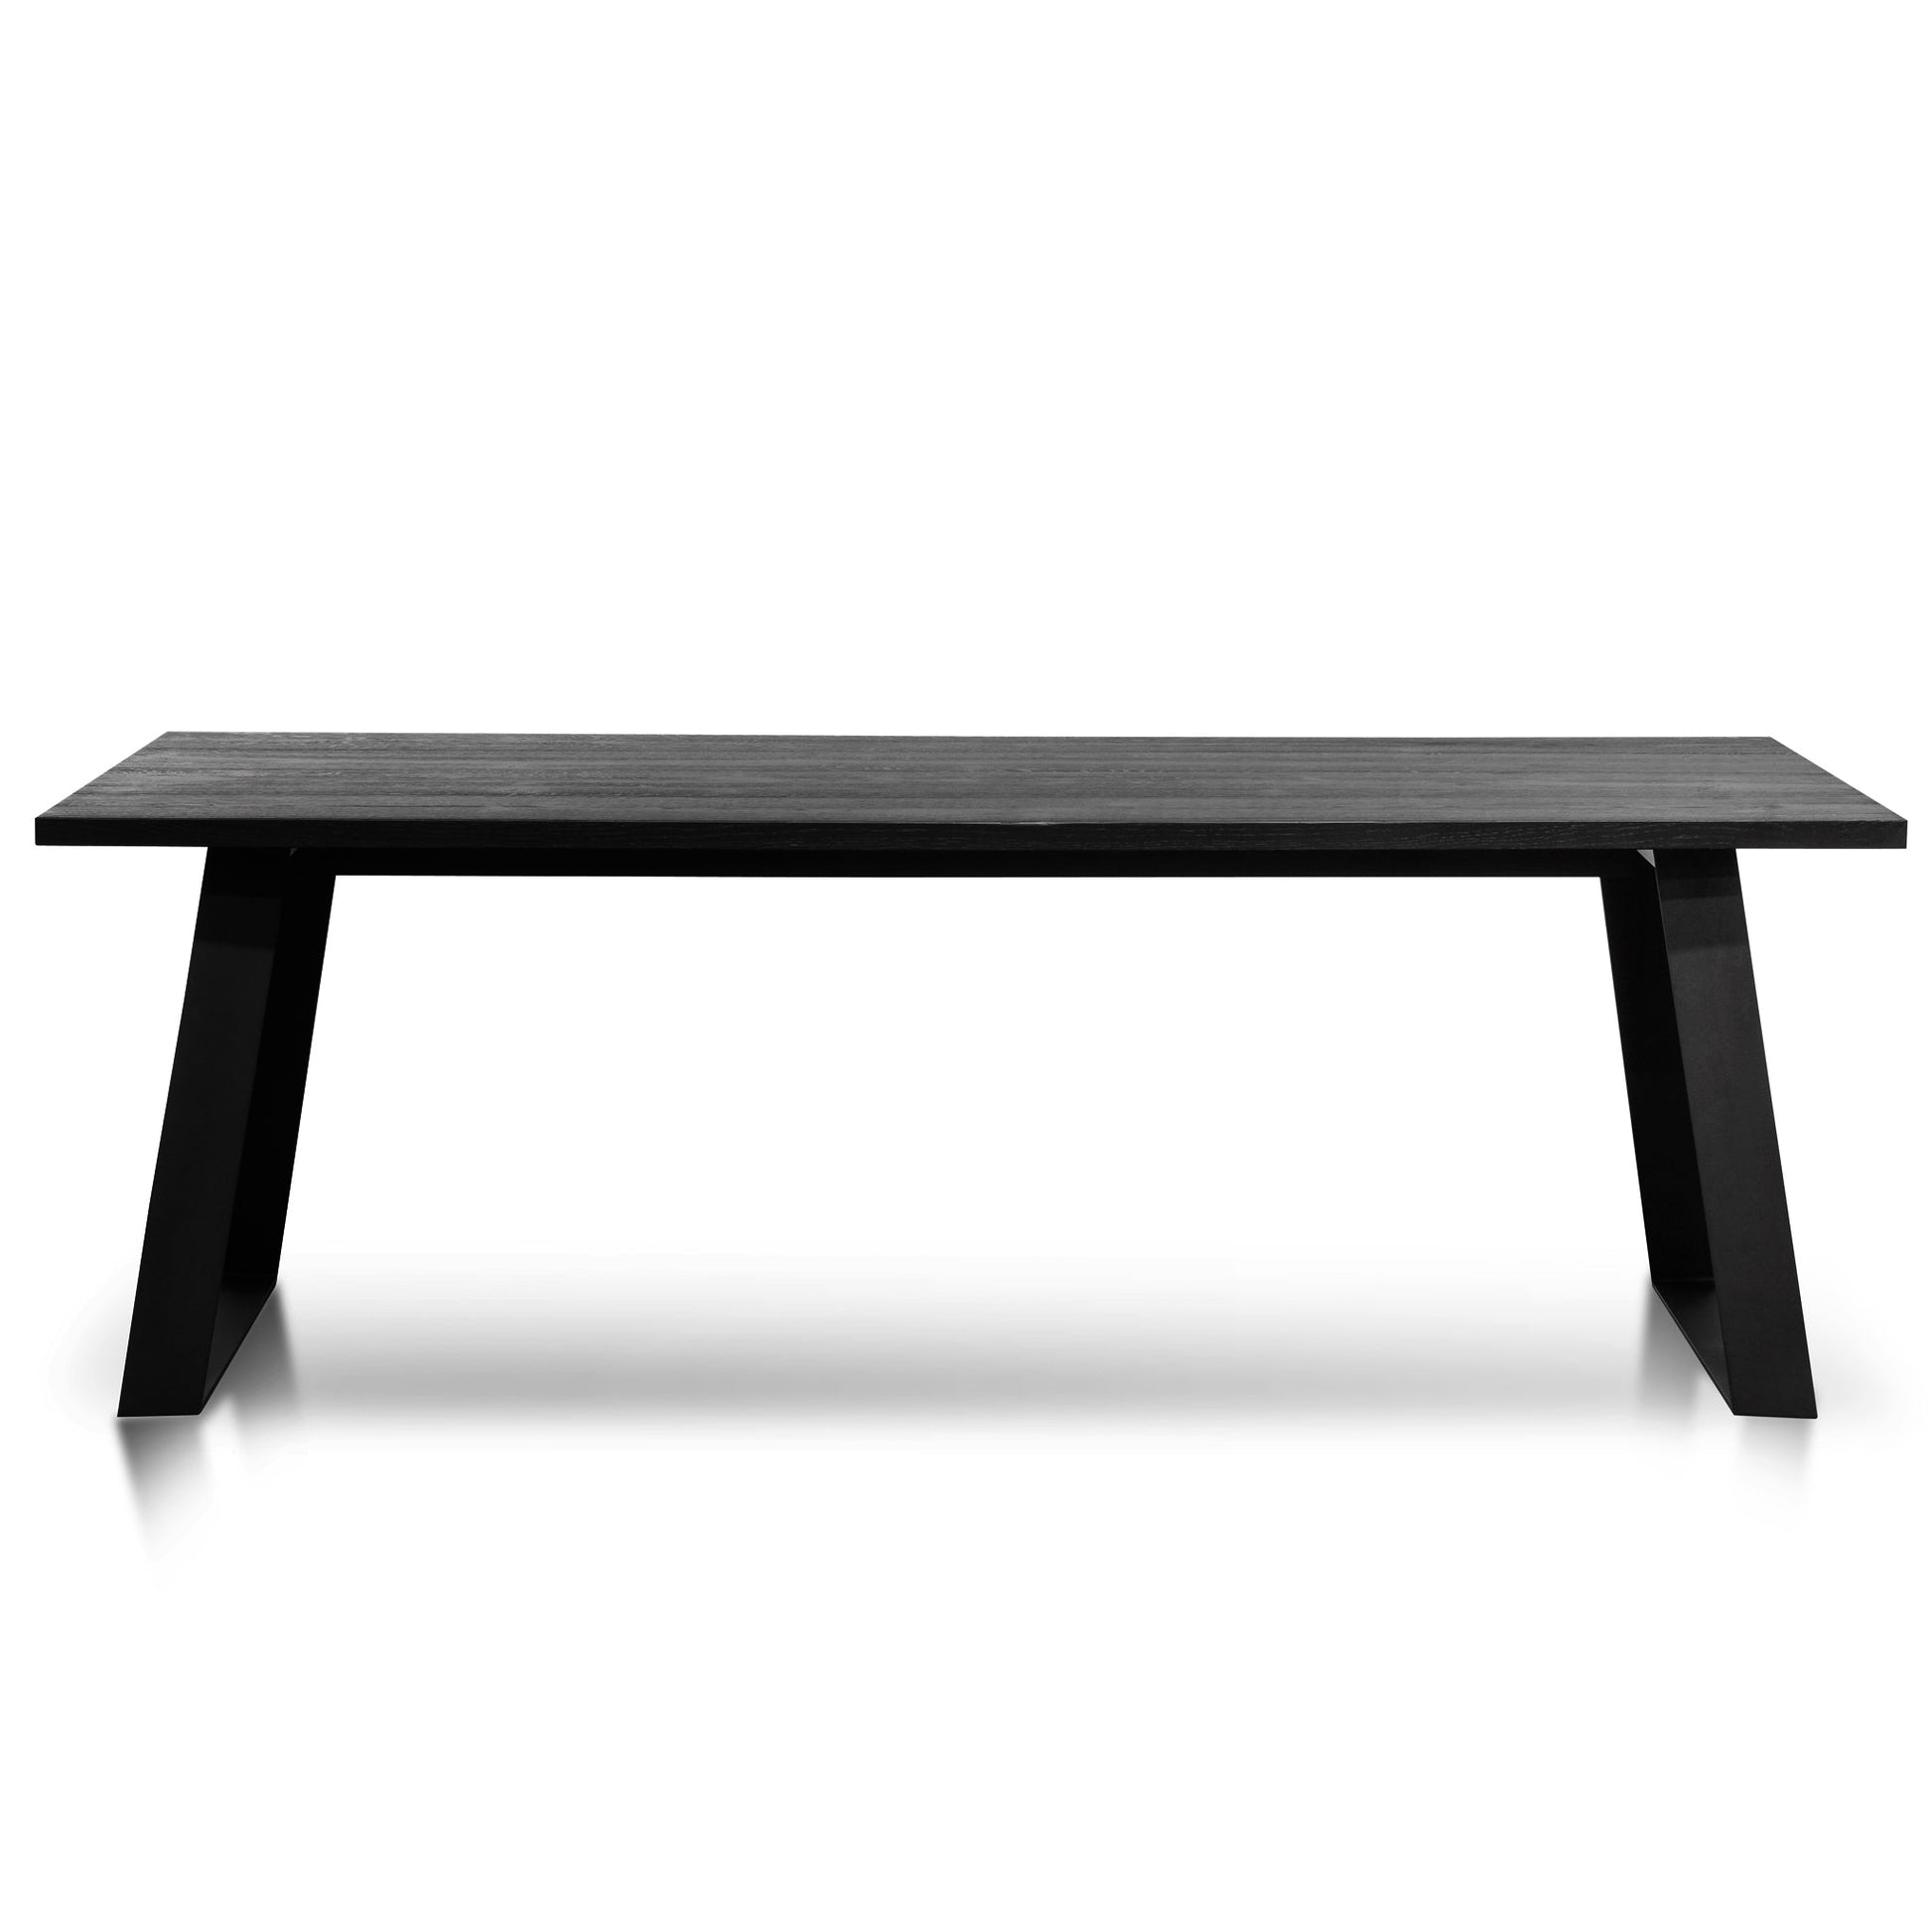 Cameron Oval 2m Marble Dining Table - Black Base-1